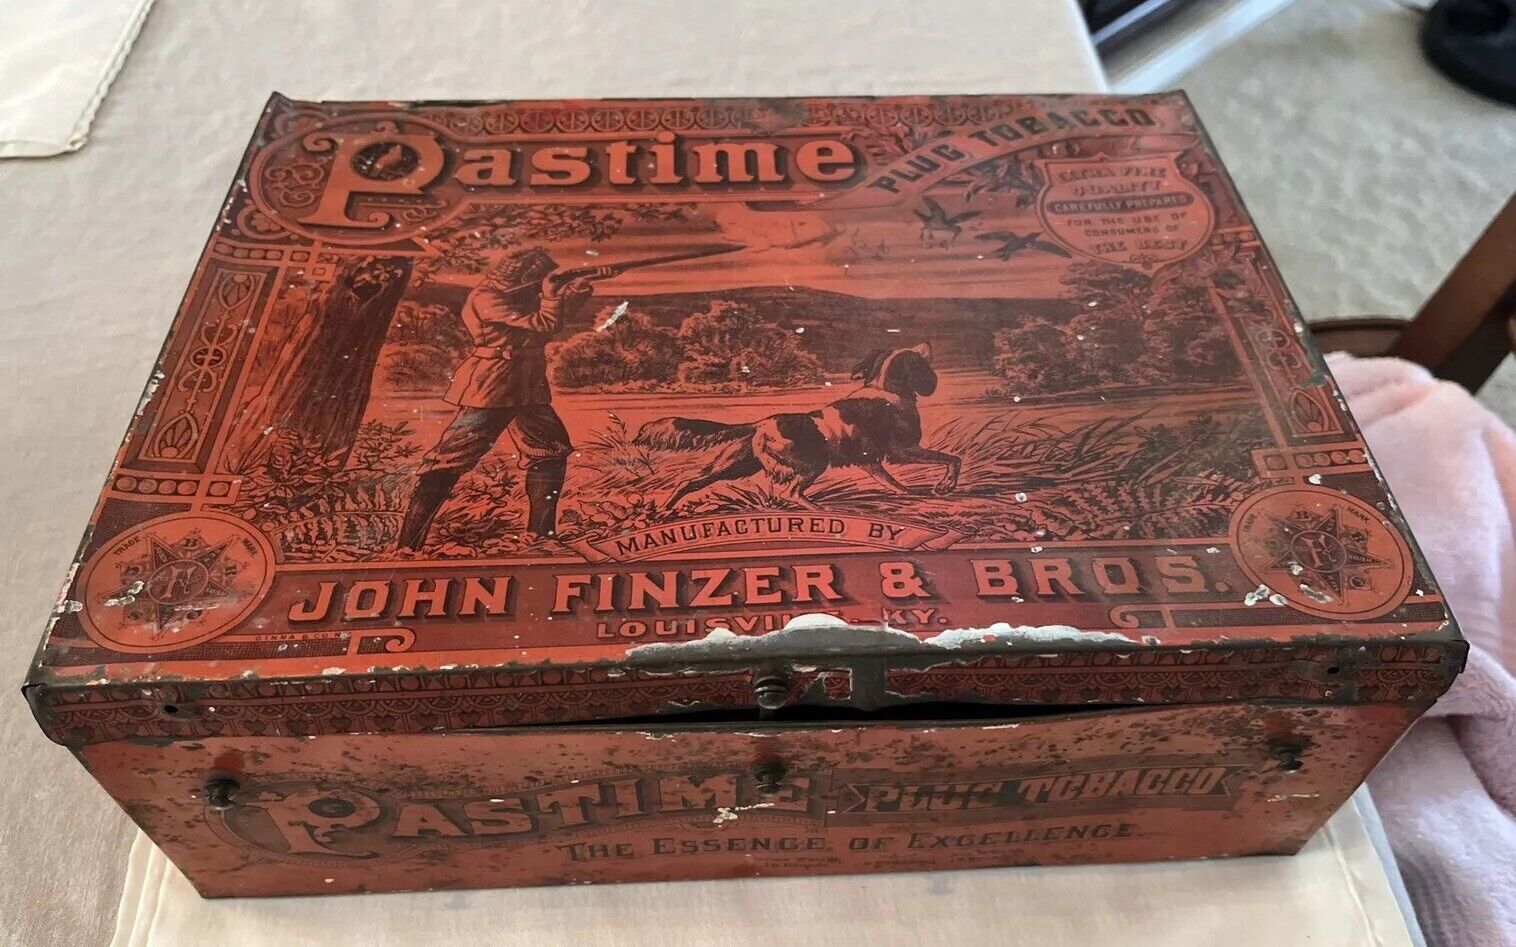 Antique 1890s Pastime Plug Tobacco Advertising Tin General Store Counter Display